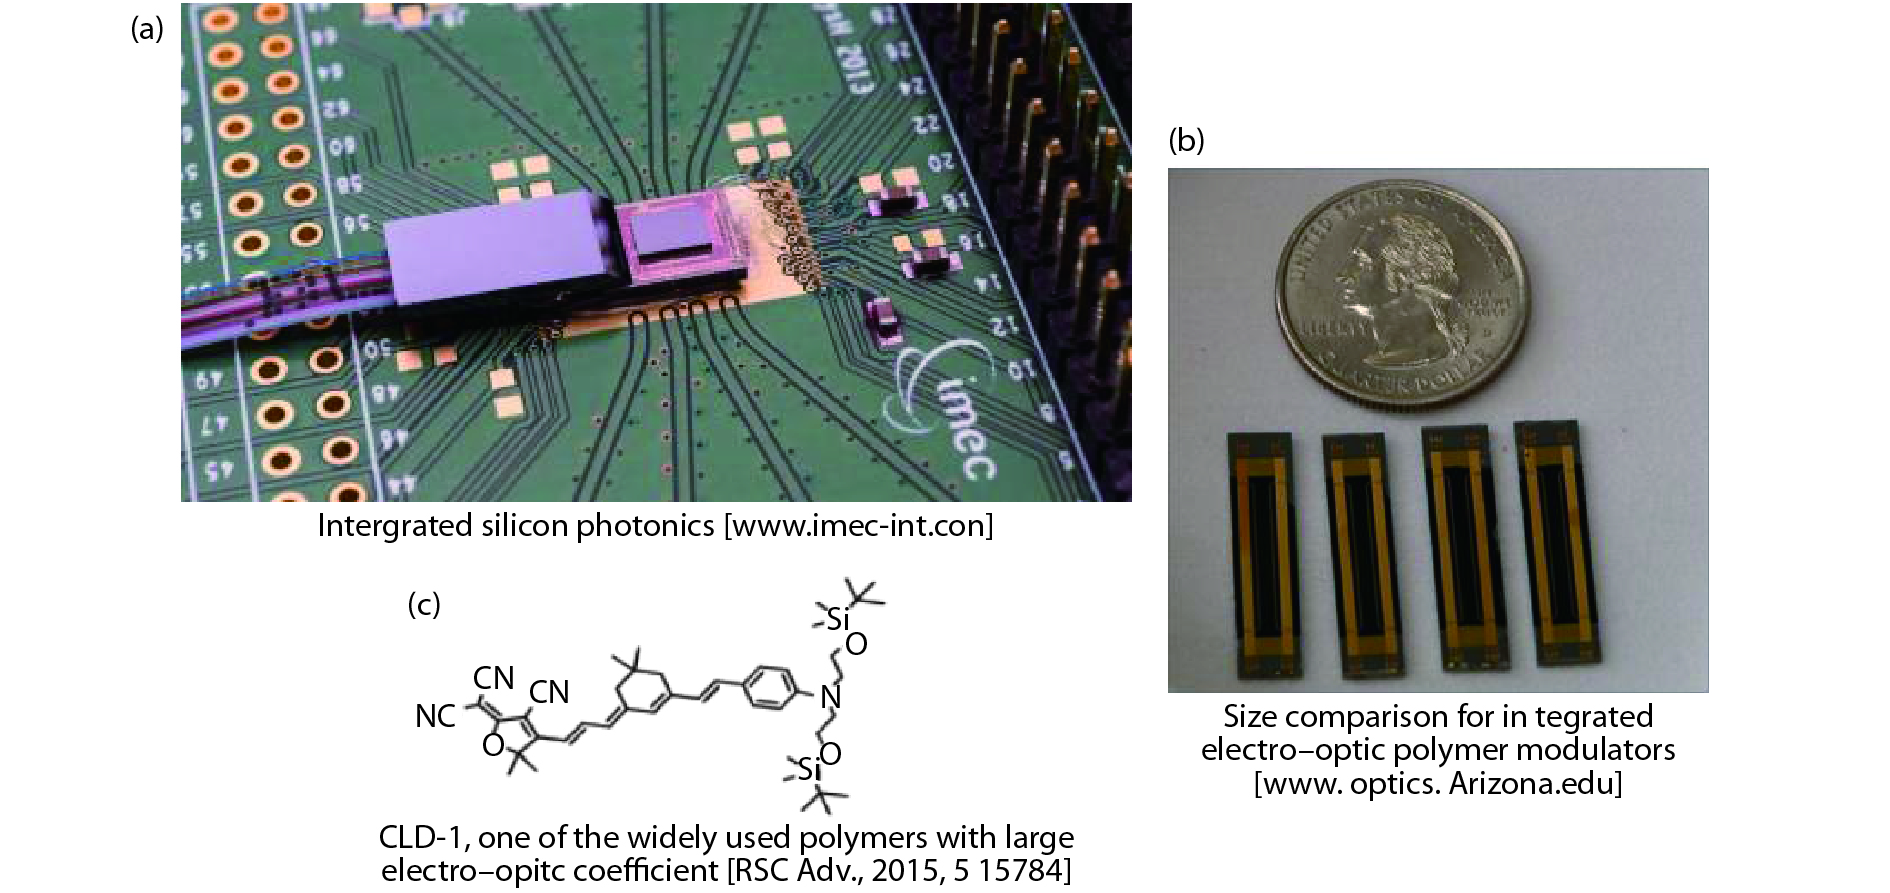 (a) Integrated silicon photonics[22]. (b) Size comparison for integrated electro-optic polymer modulators[23]. (c) CLD-1, one of the widely used polymers with large electro-optic coefficient[24].